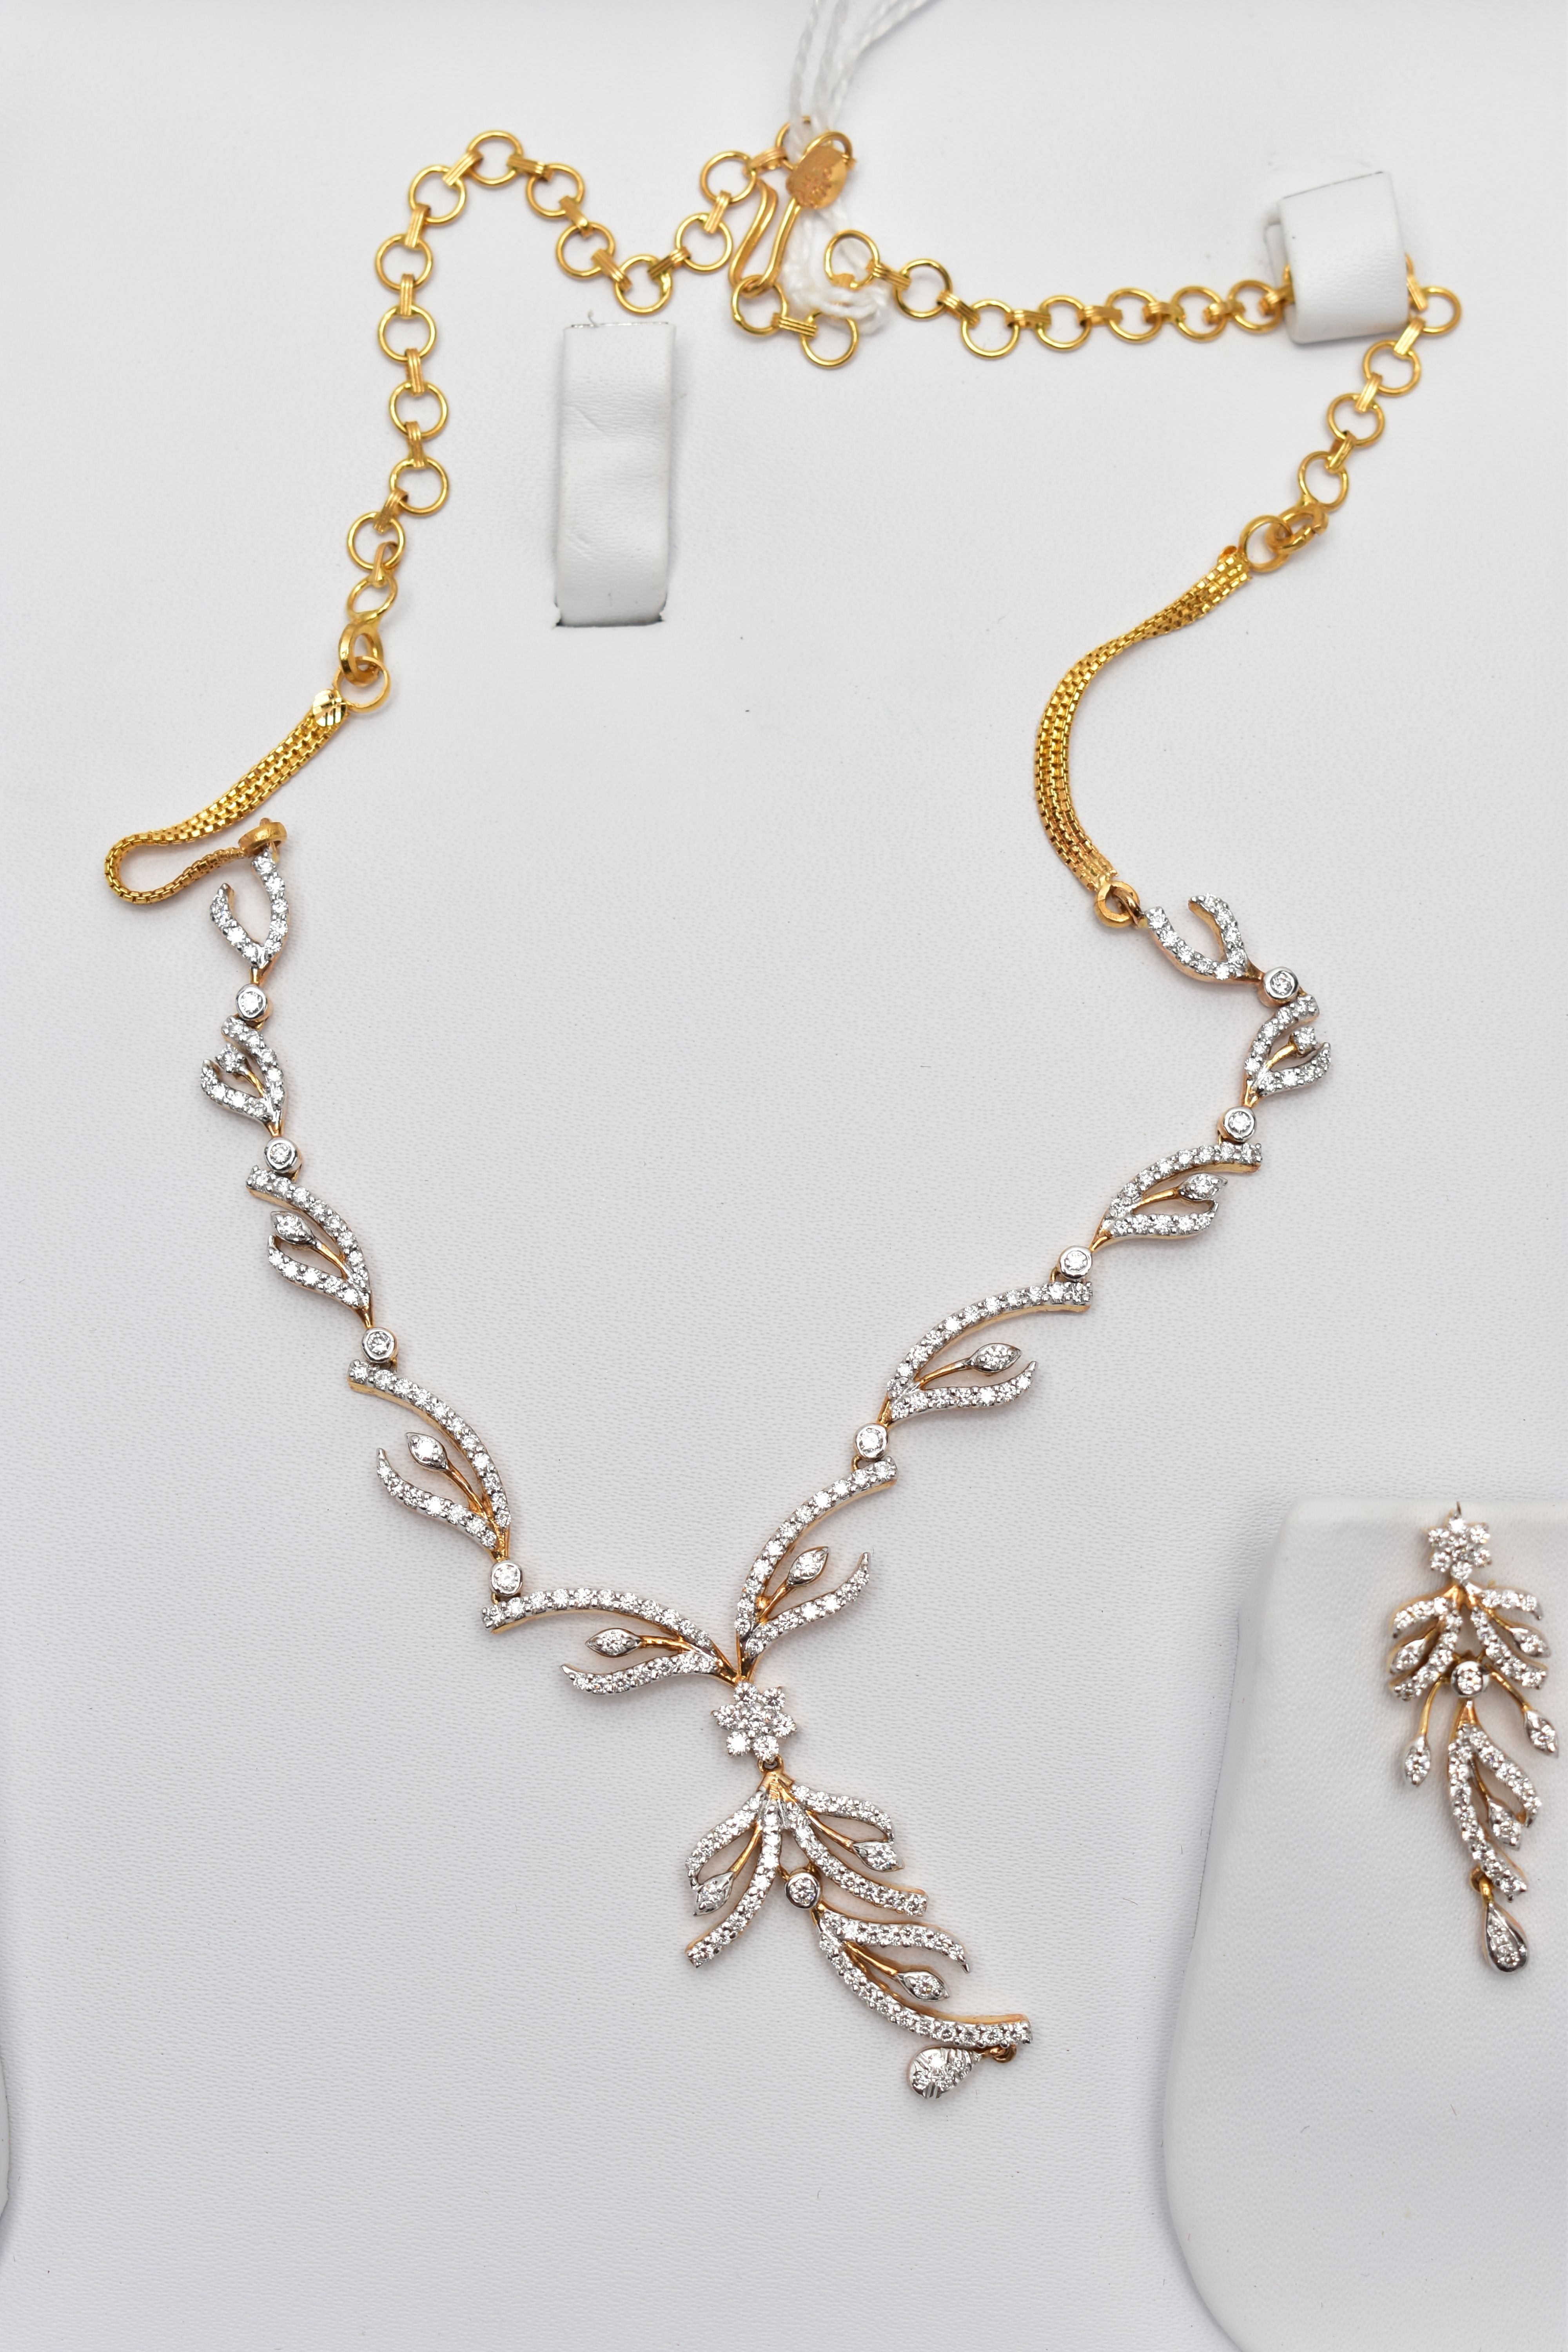 A DIAMOND NECKLACE AND EARRING SET, WITH ONLINE IGI NATURAL DIAMOND GRADING REPORT, the necklace - Image 4 of 4